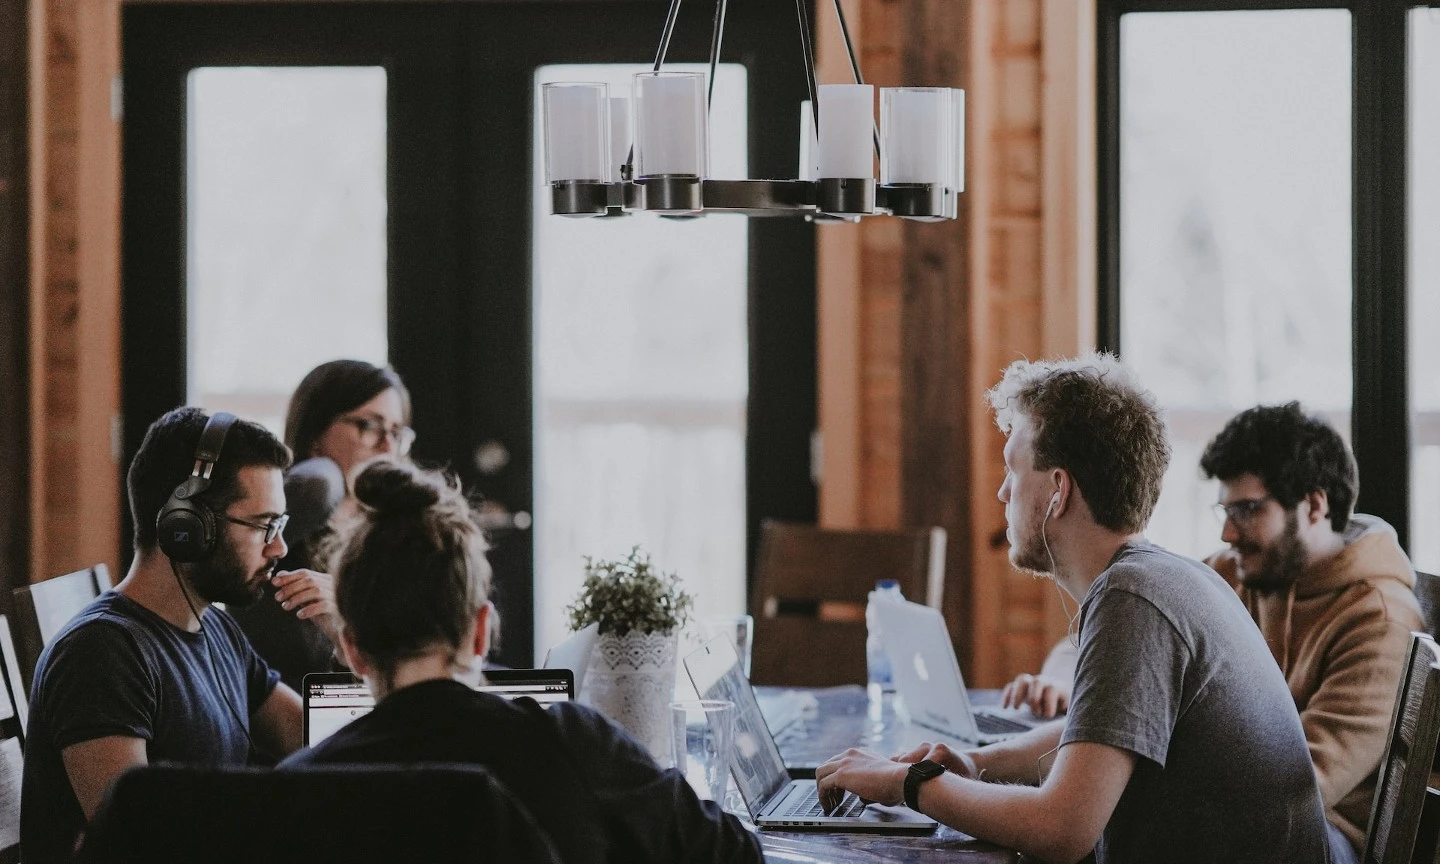 people sitting around a table working and having a meeting. Photo by annie spratt via unsplash